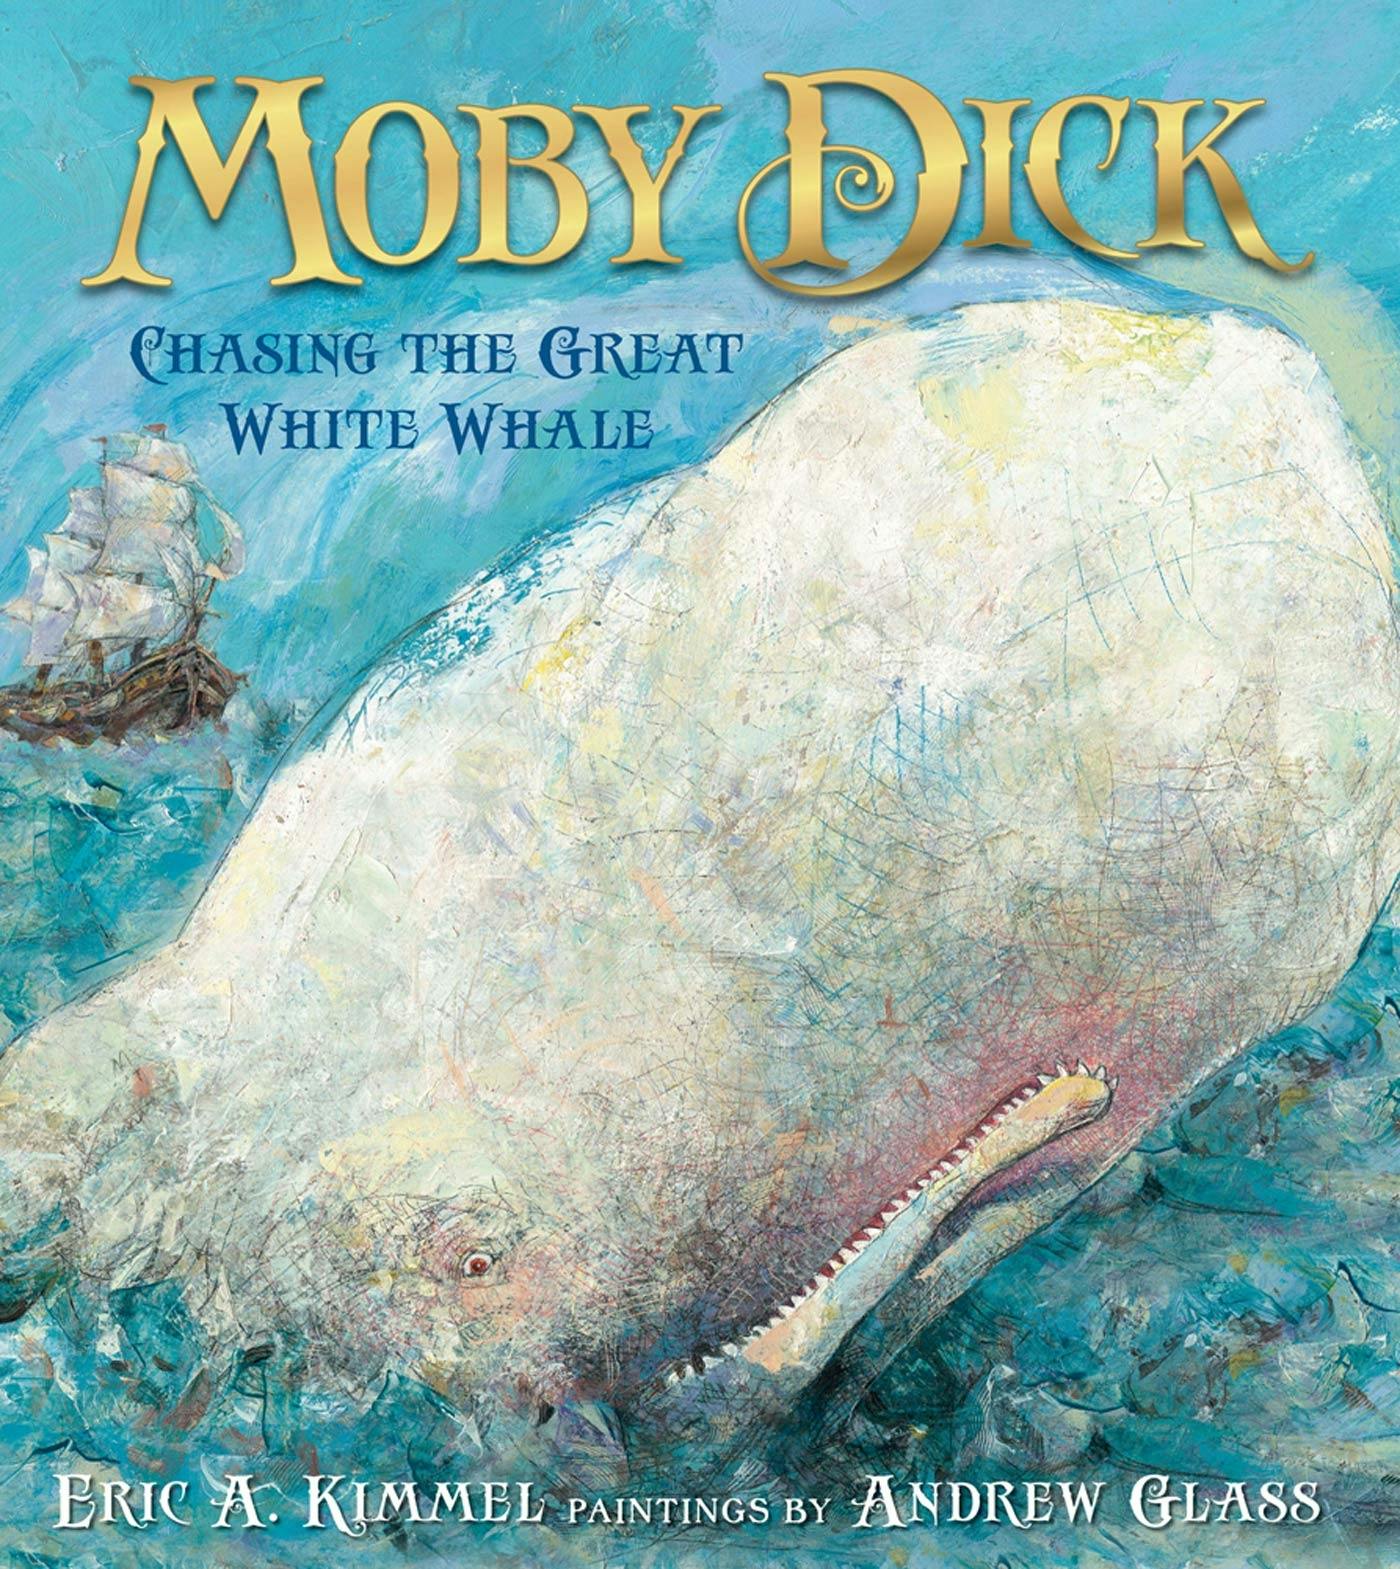 Was There a Real Moby Dick?